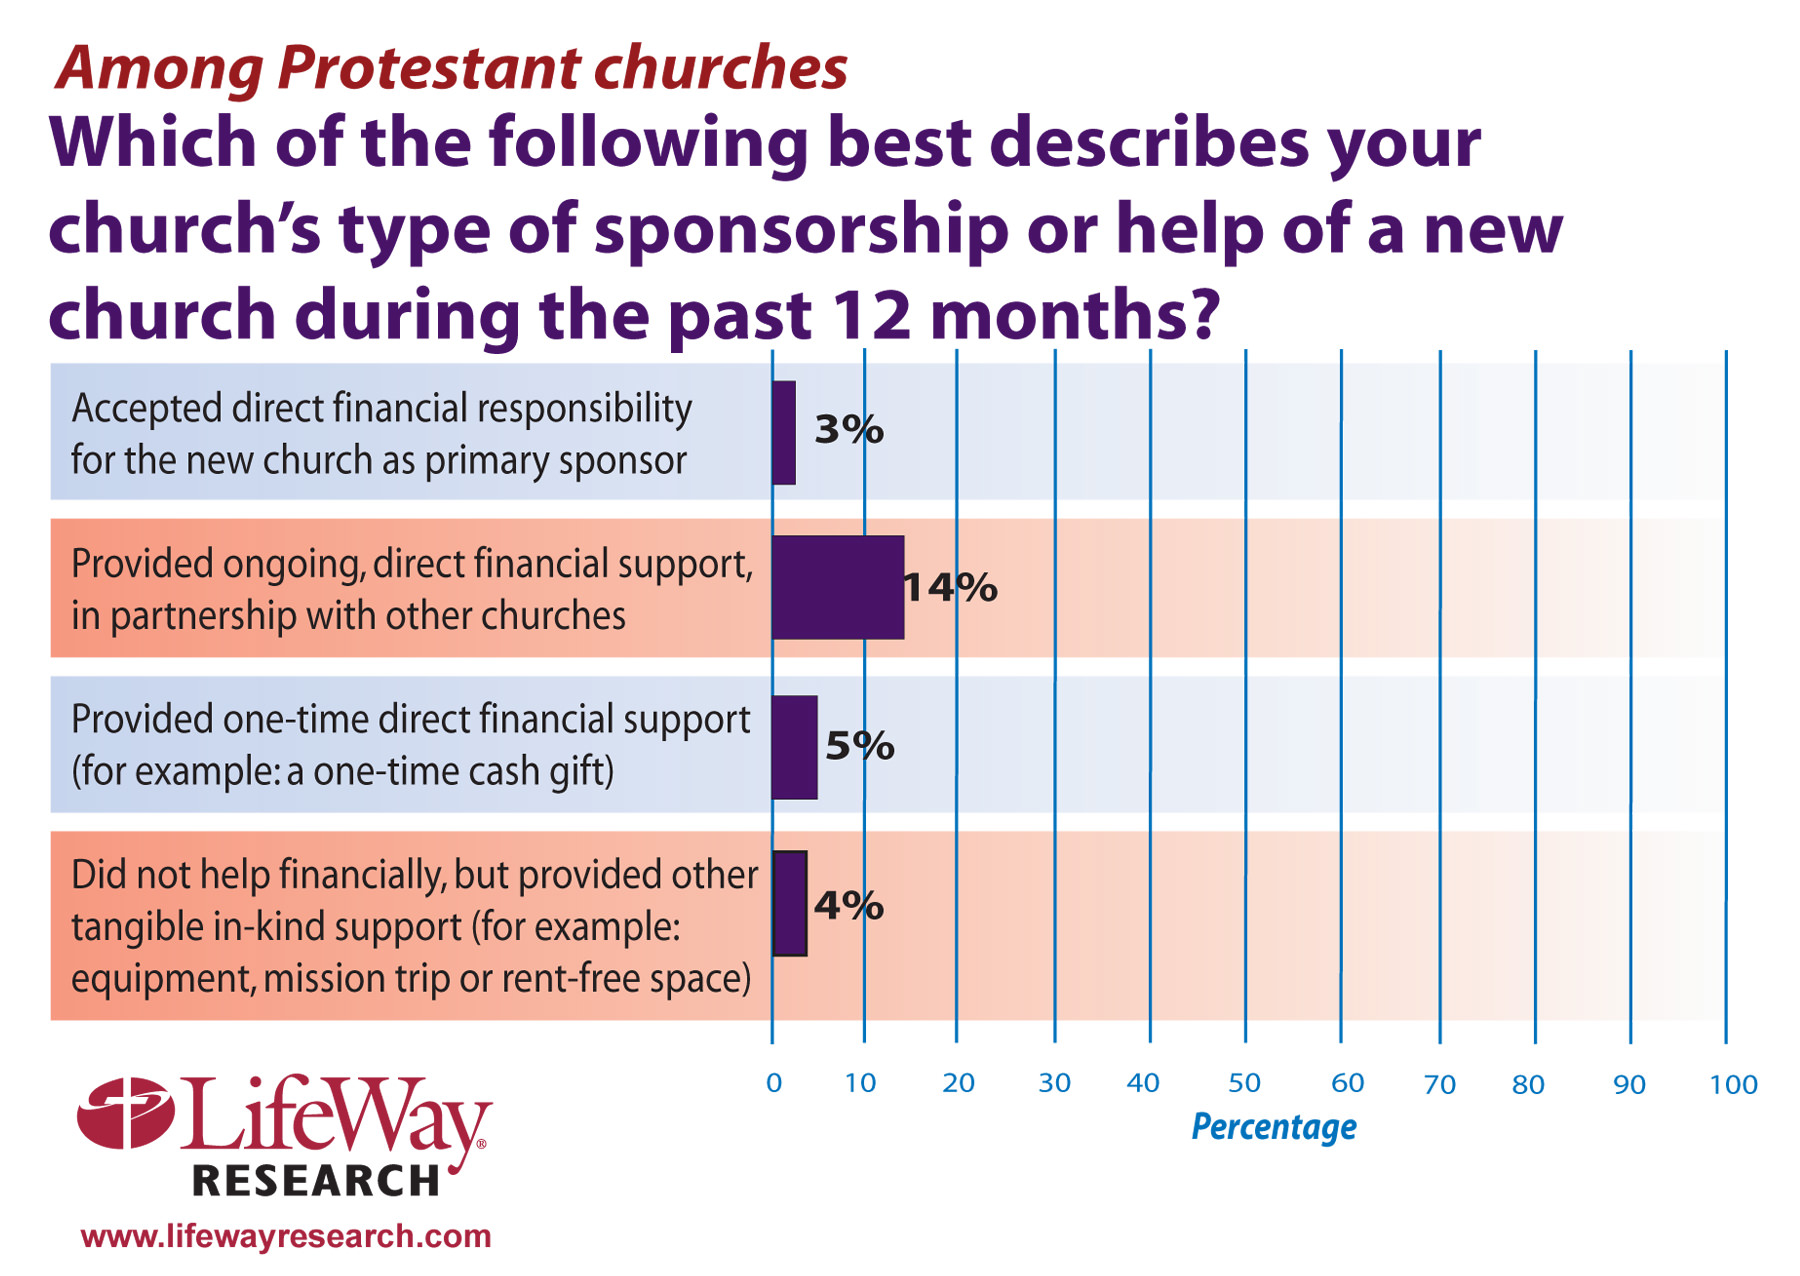 church openings outpace closings, but support for church plants lacking